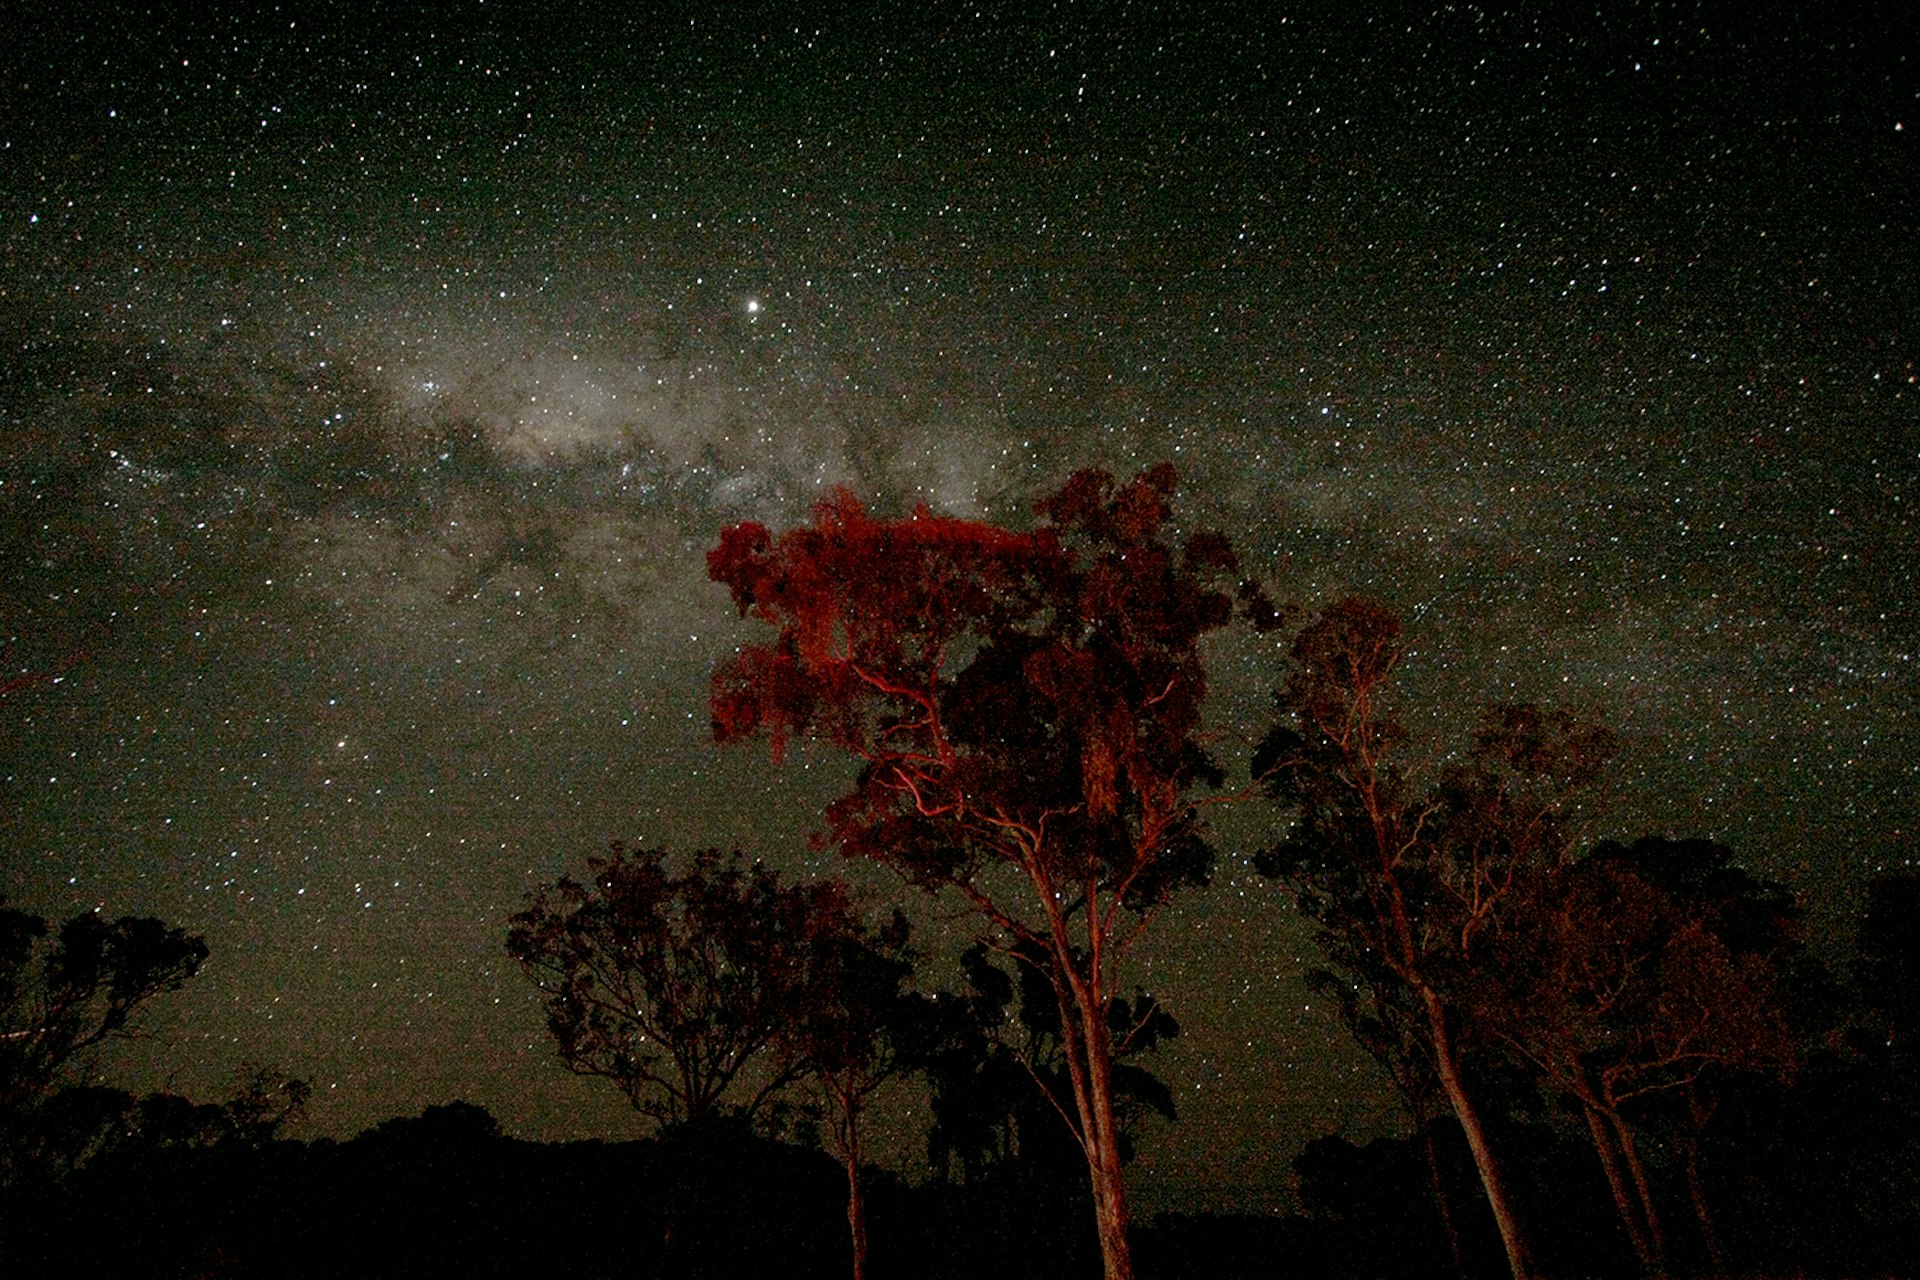 Want to crane your neck at the Milky Way? In remote parts of New South Wales, you won't even need a telescope. Image by Paco Alcantara / Moment / Getty Images